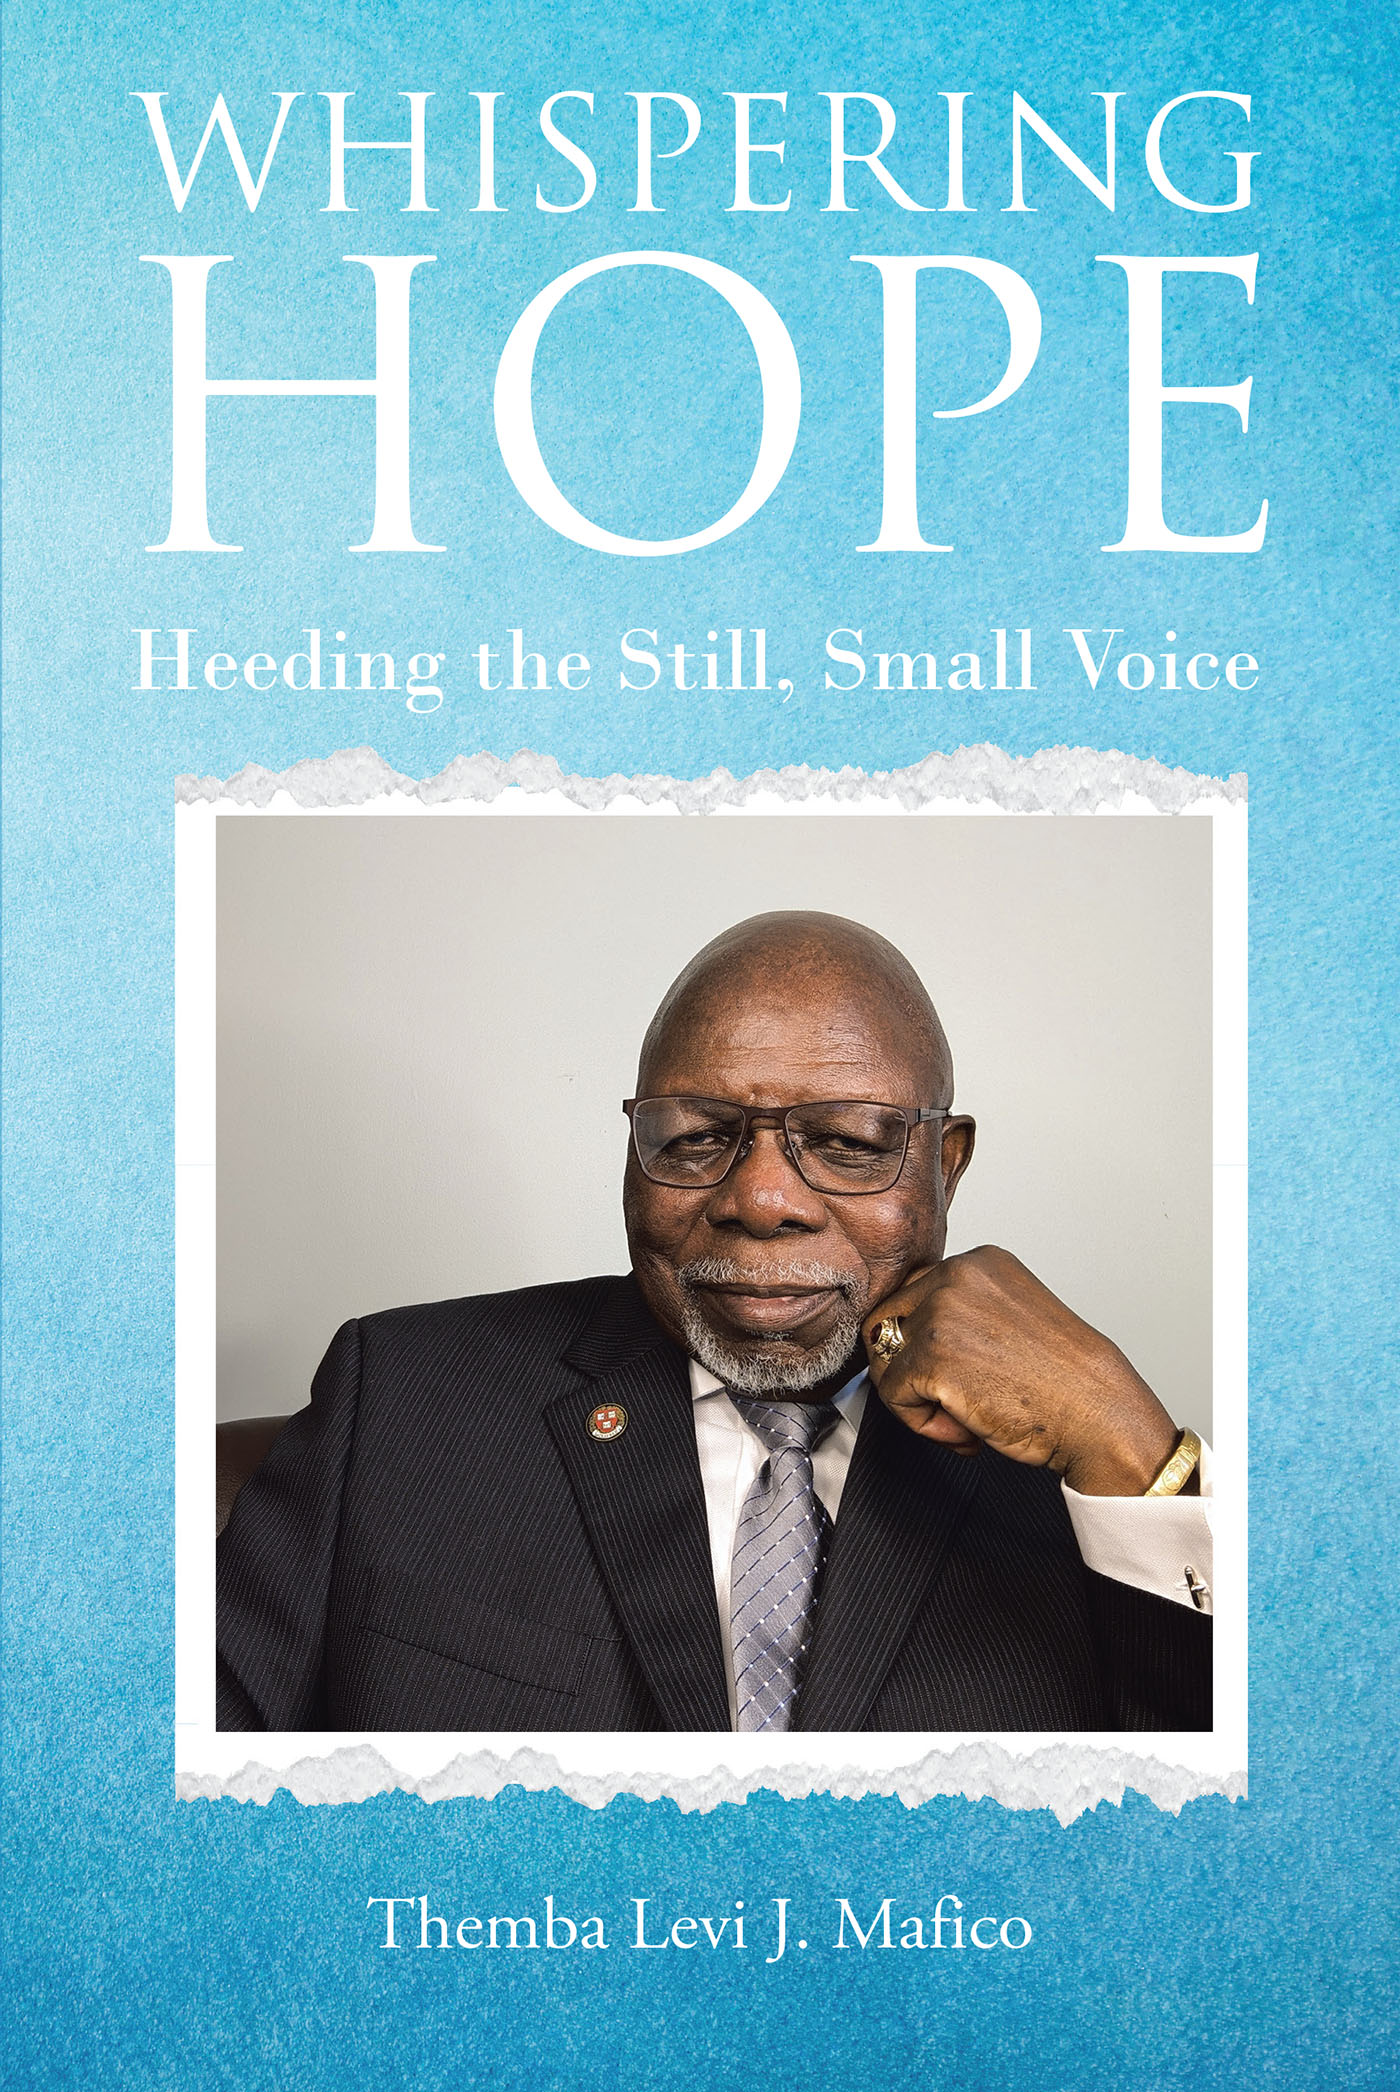 Themba Levi J. Mafico’s Newly Released “WHISPERING HOPE: Heeding the Still, Small Voice” is a Powerful Memoir That Takes Readers on a Journey of Faith and Determination